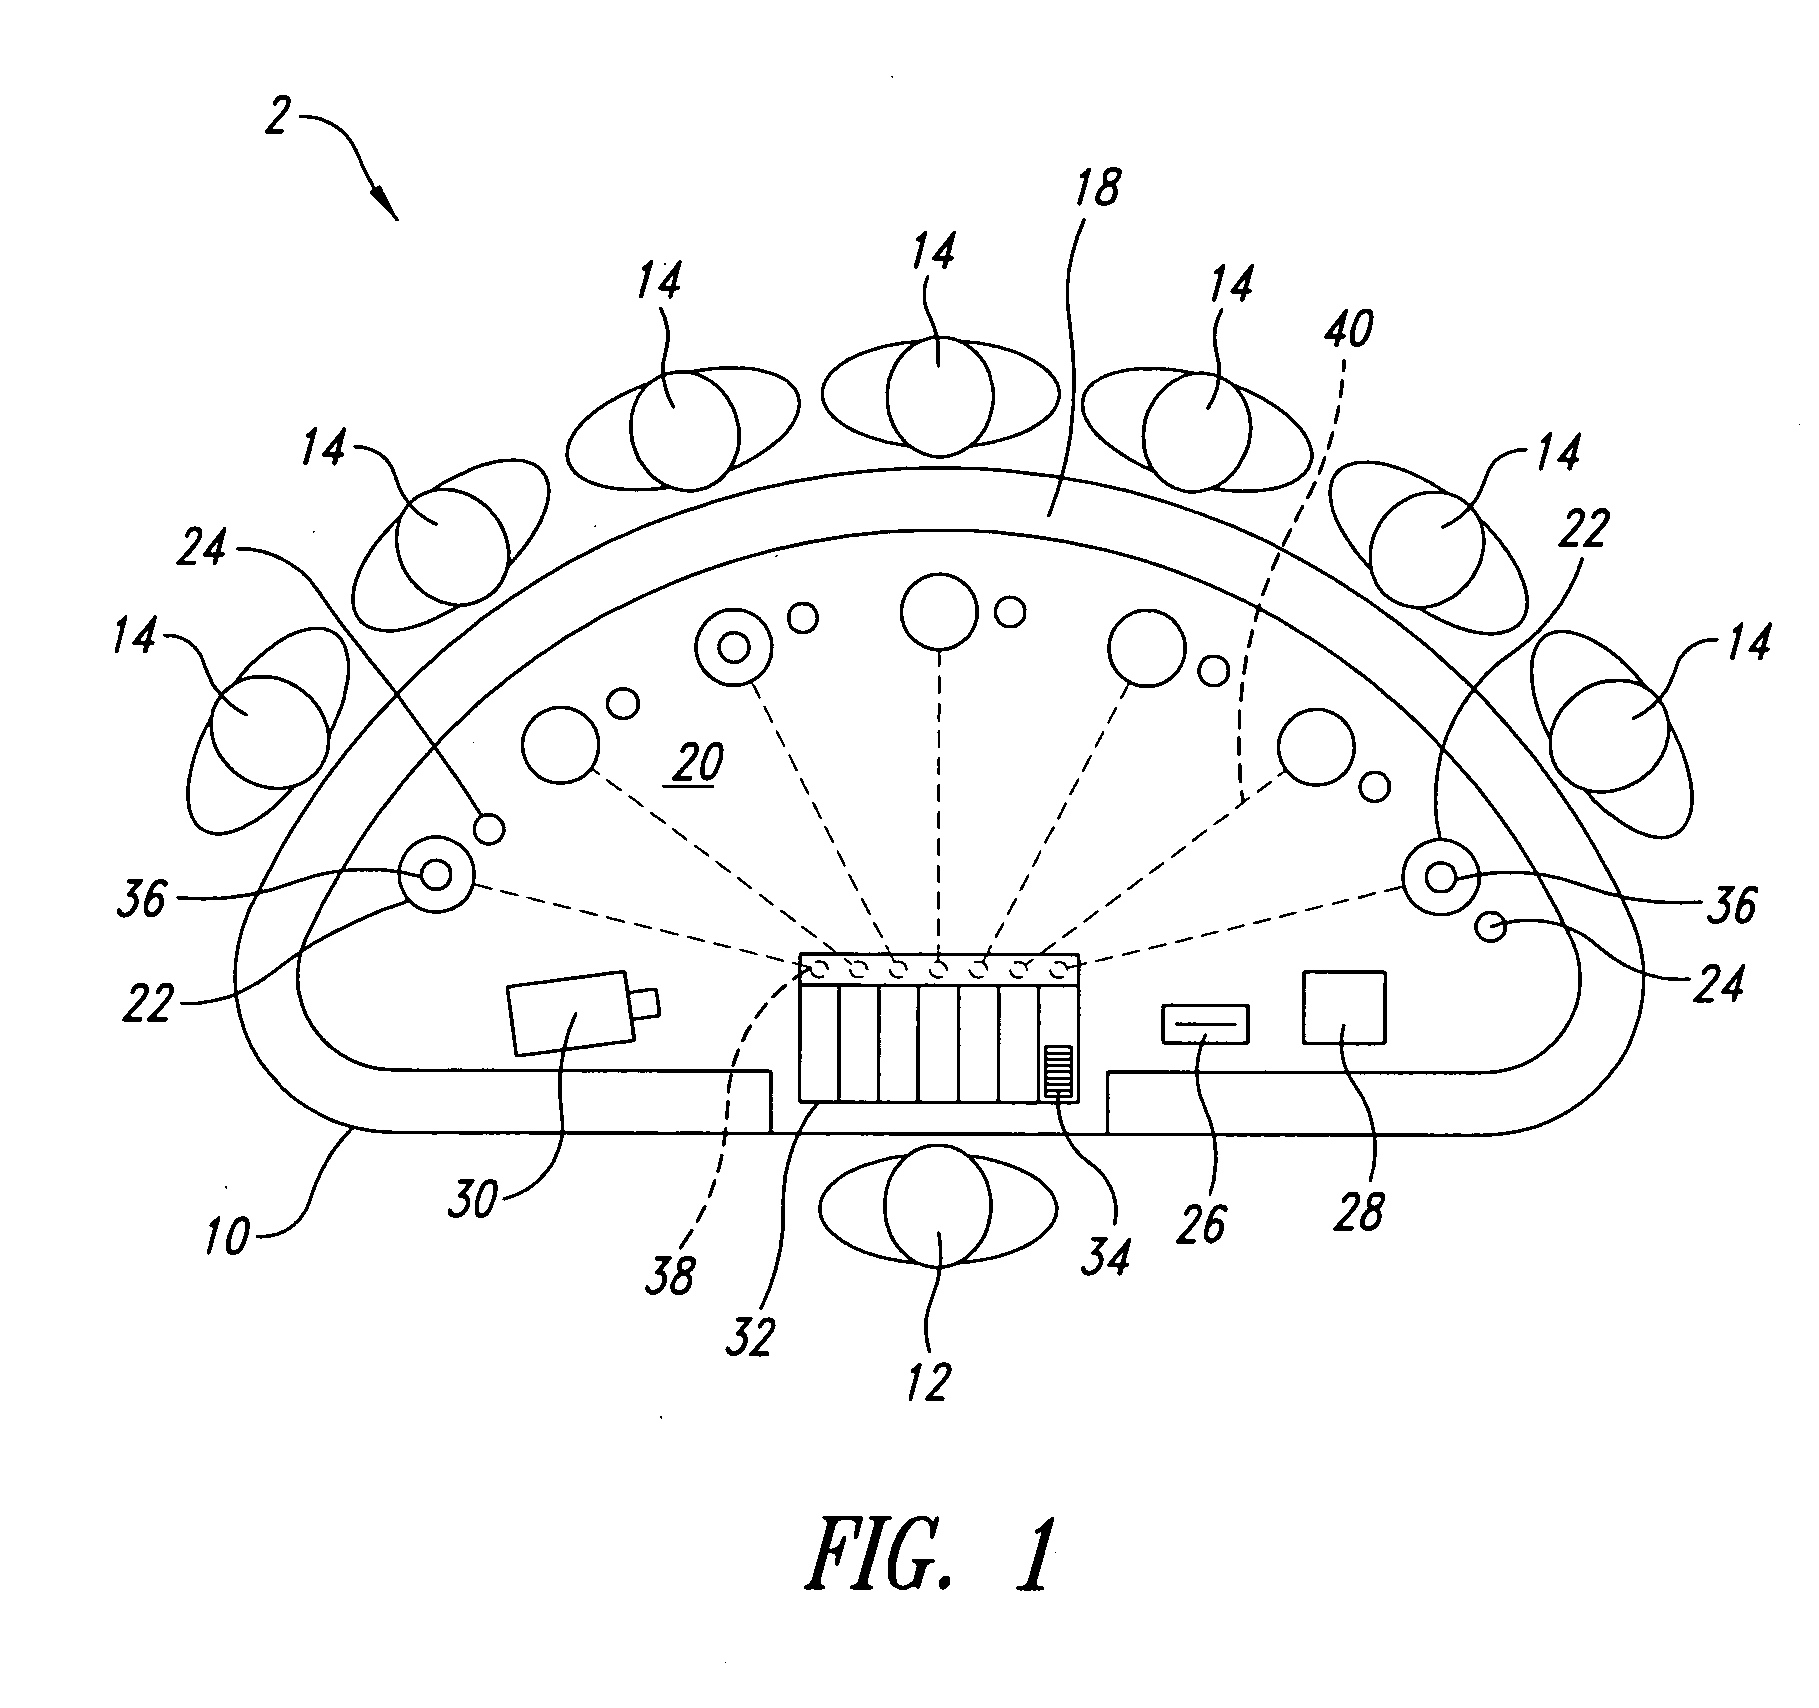 Systems and methods for scanning gaming chips placed on a gaming table